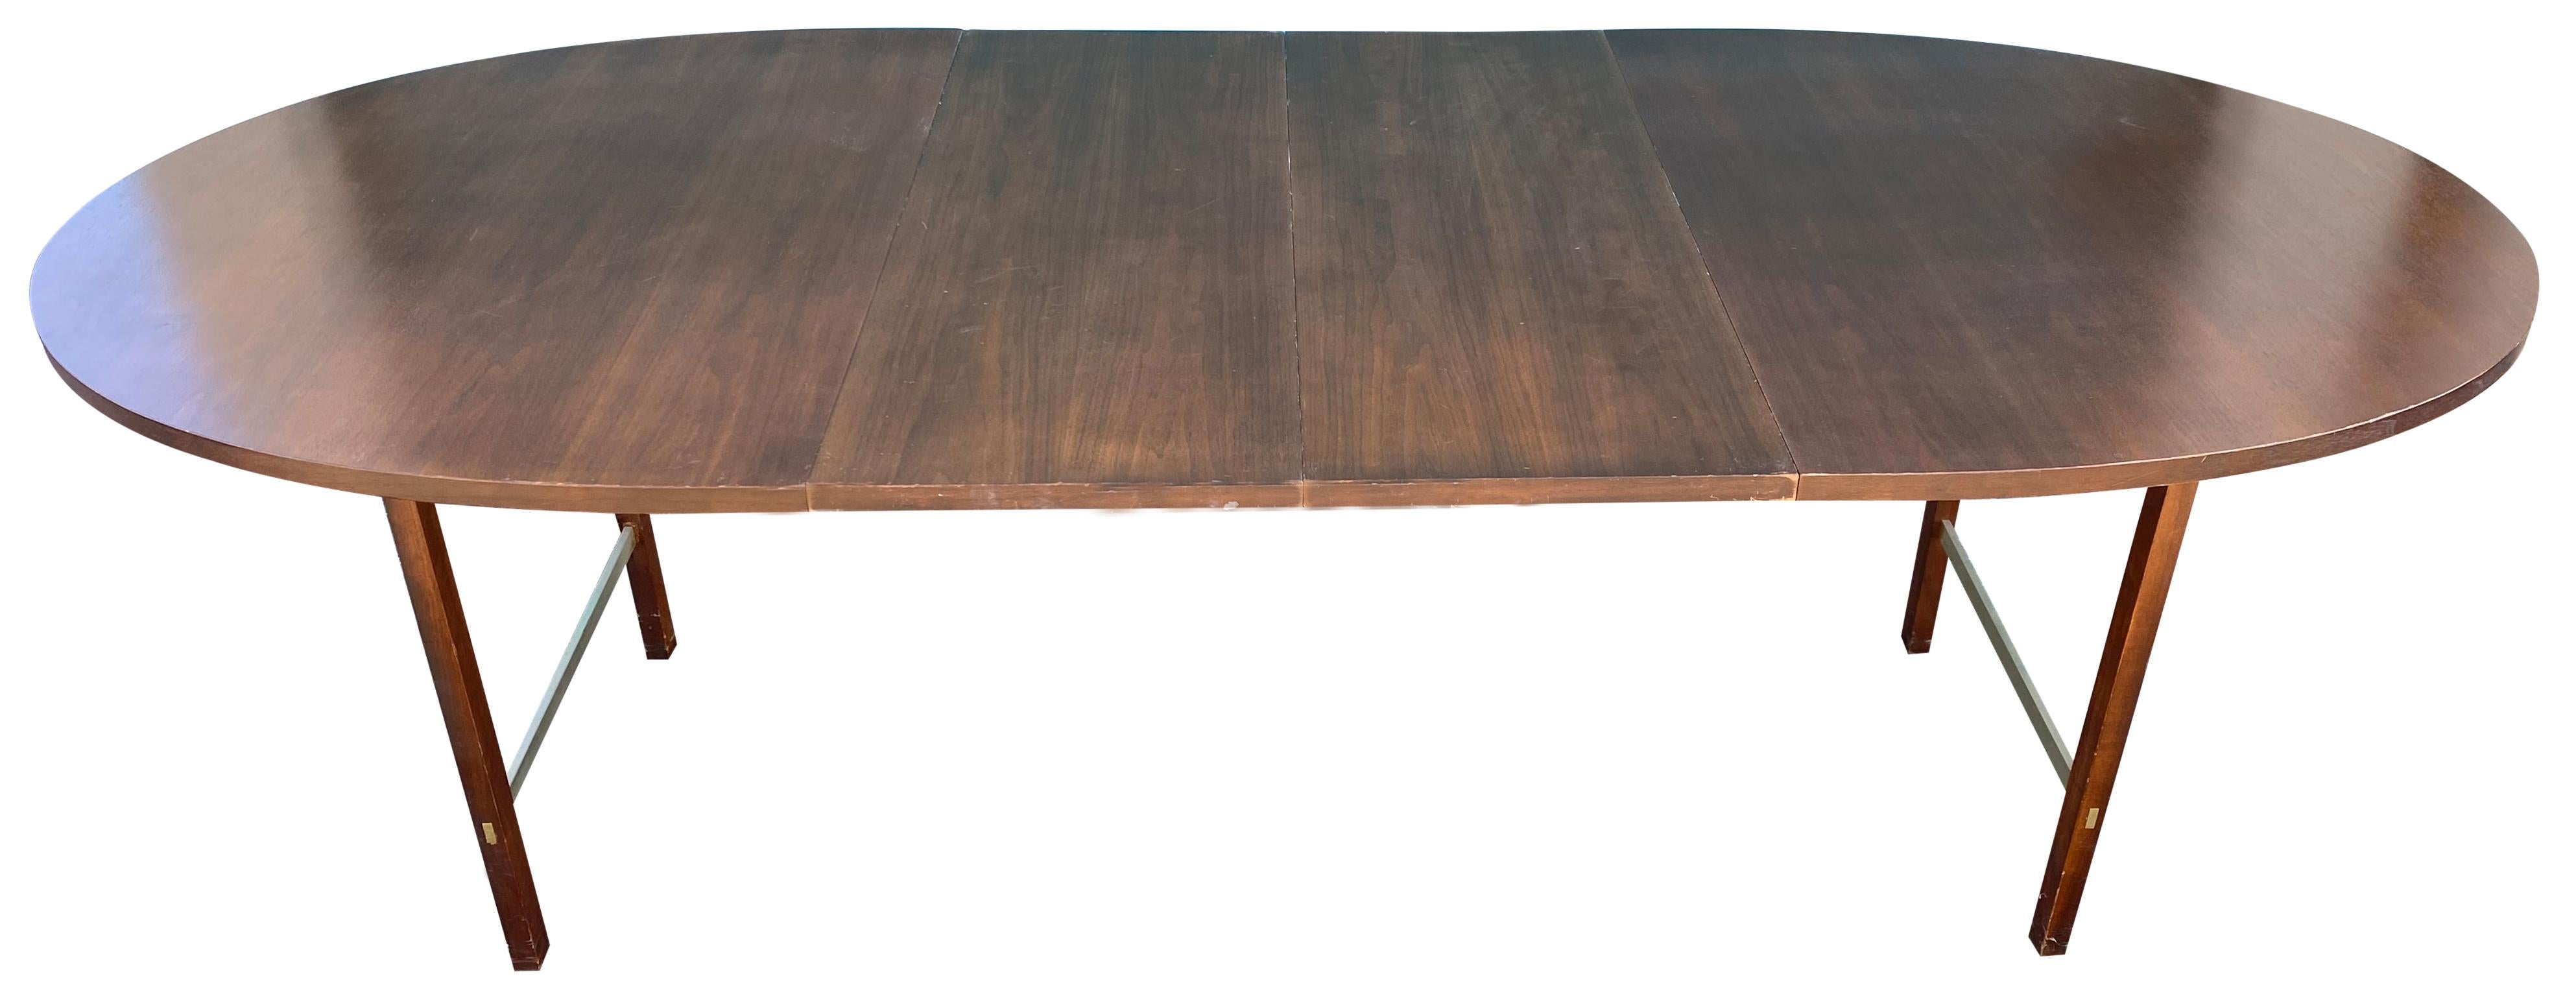 Mid-Century Modern Walnut Dining Table by Paul McCobb for Calvin 2 Leaves 1